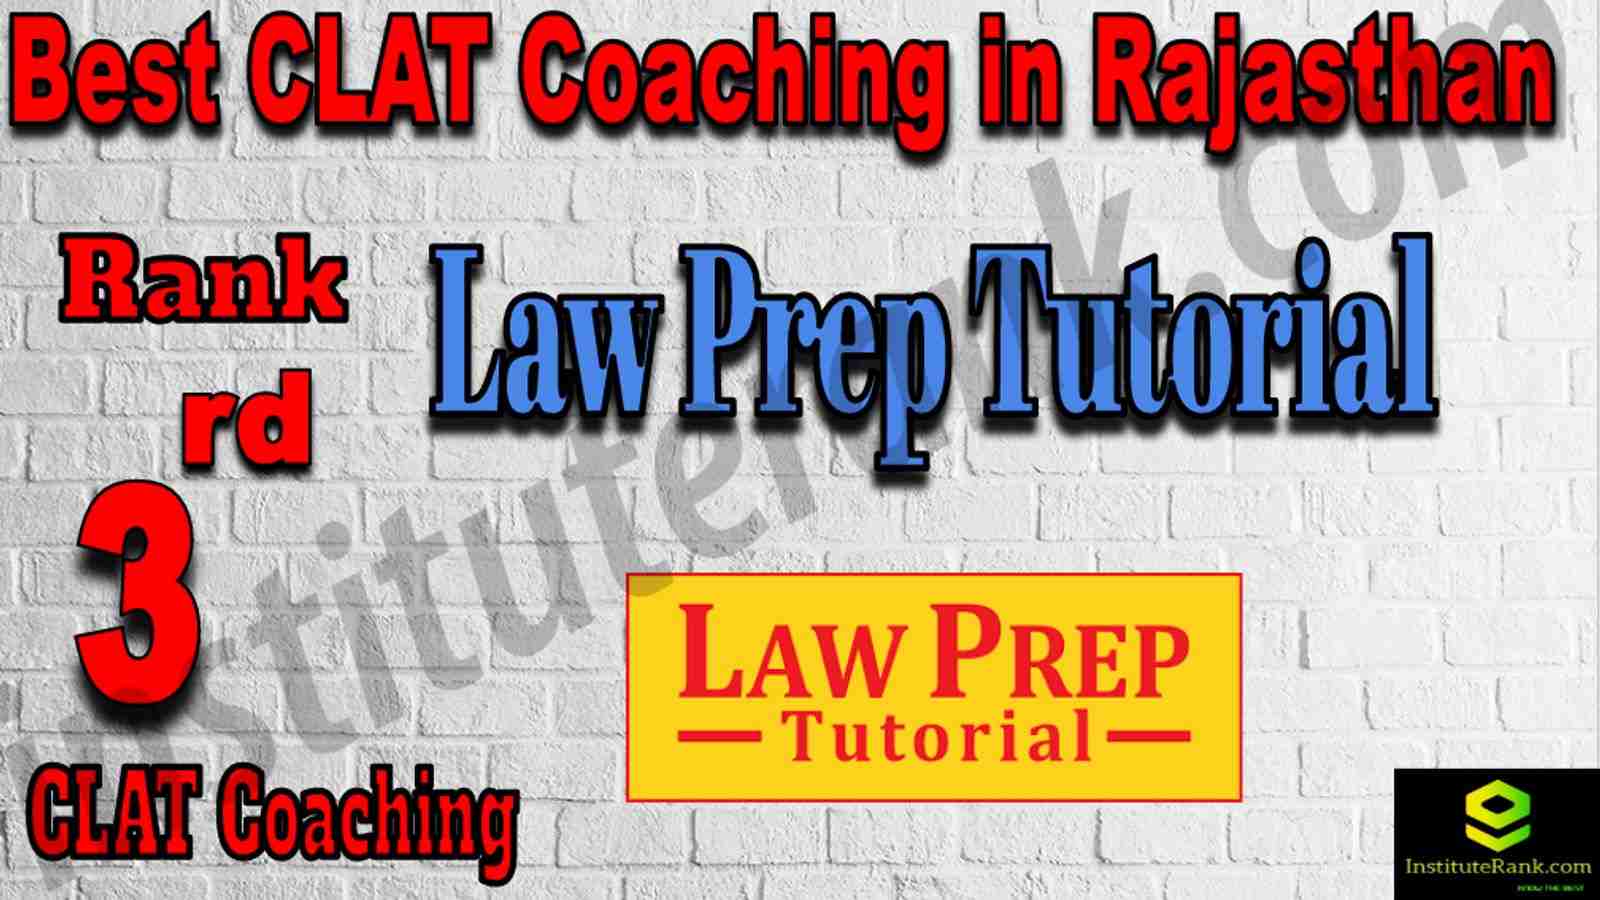 3rd Best Clat Coaching in Rajasthan